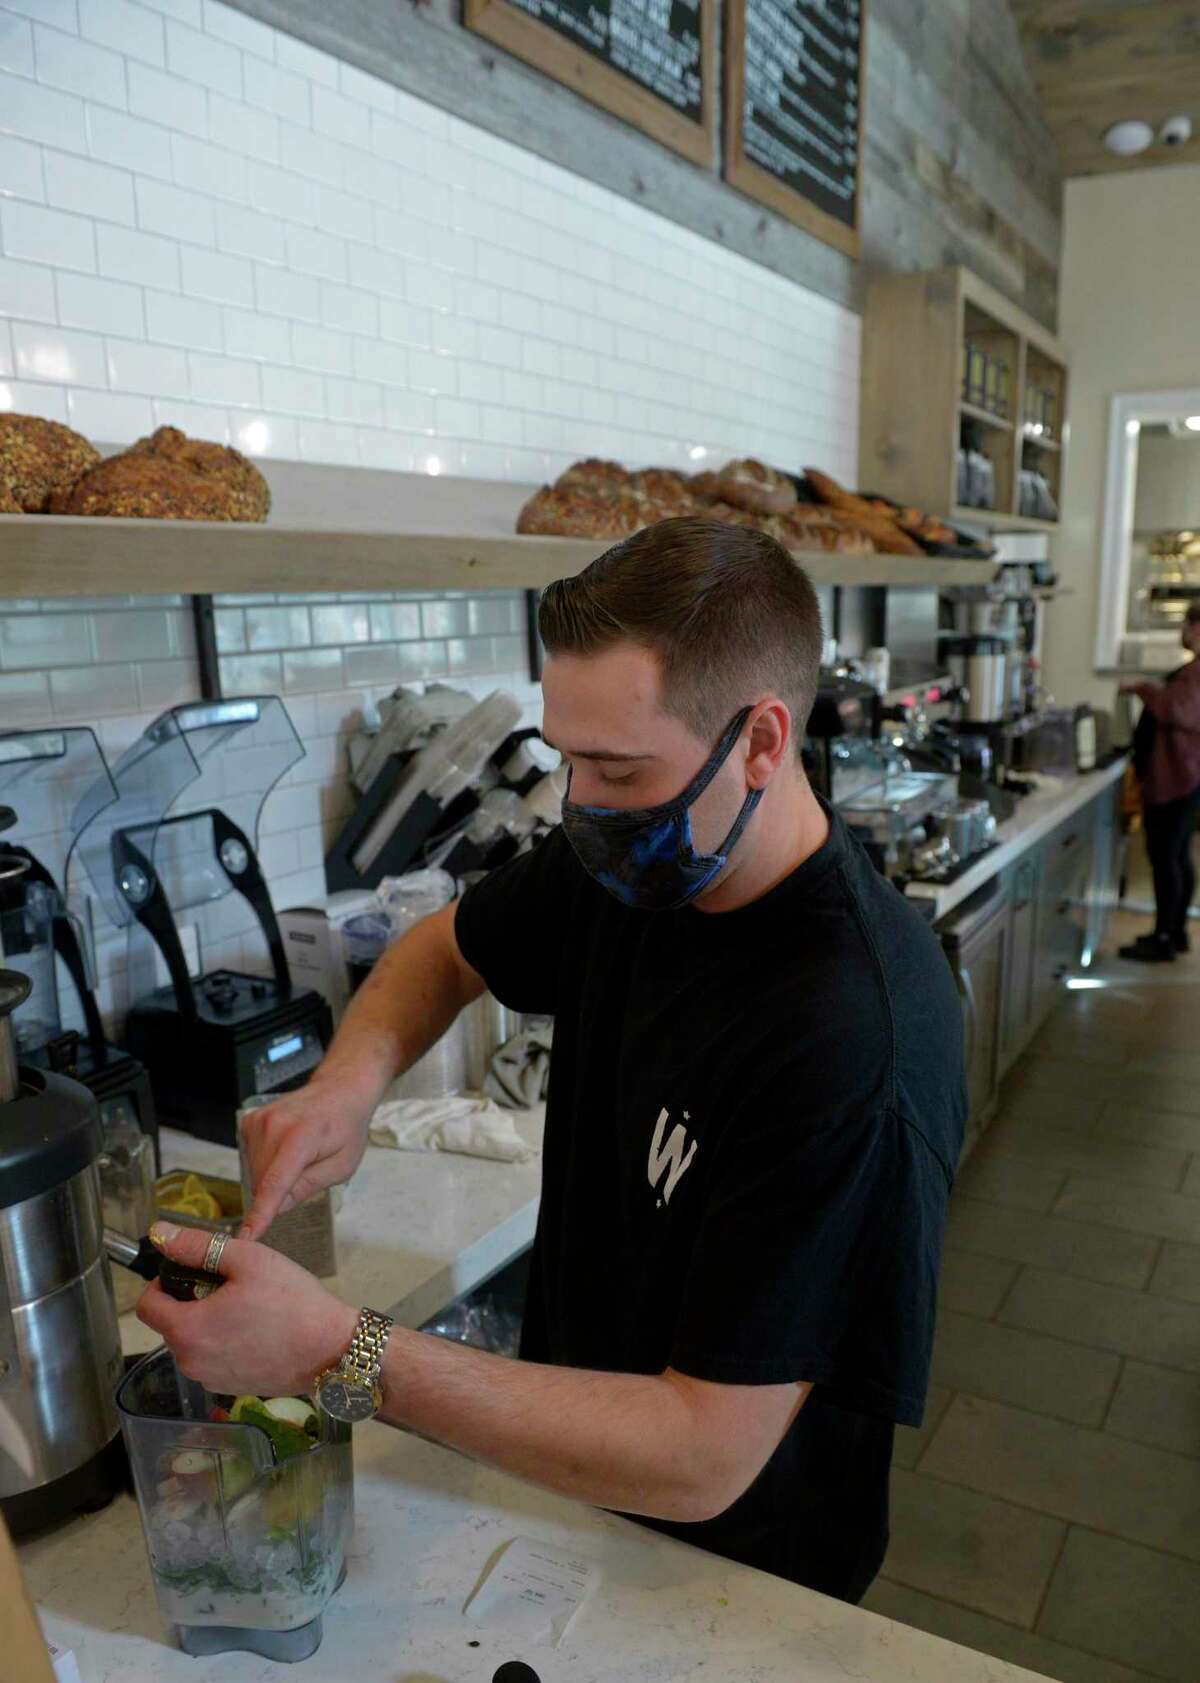 Brian Verrilli works at Wilson’s Bakery & Cafe on North Main Street in Kent, Conn, on Friday, November 19, 2021.